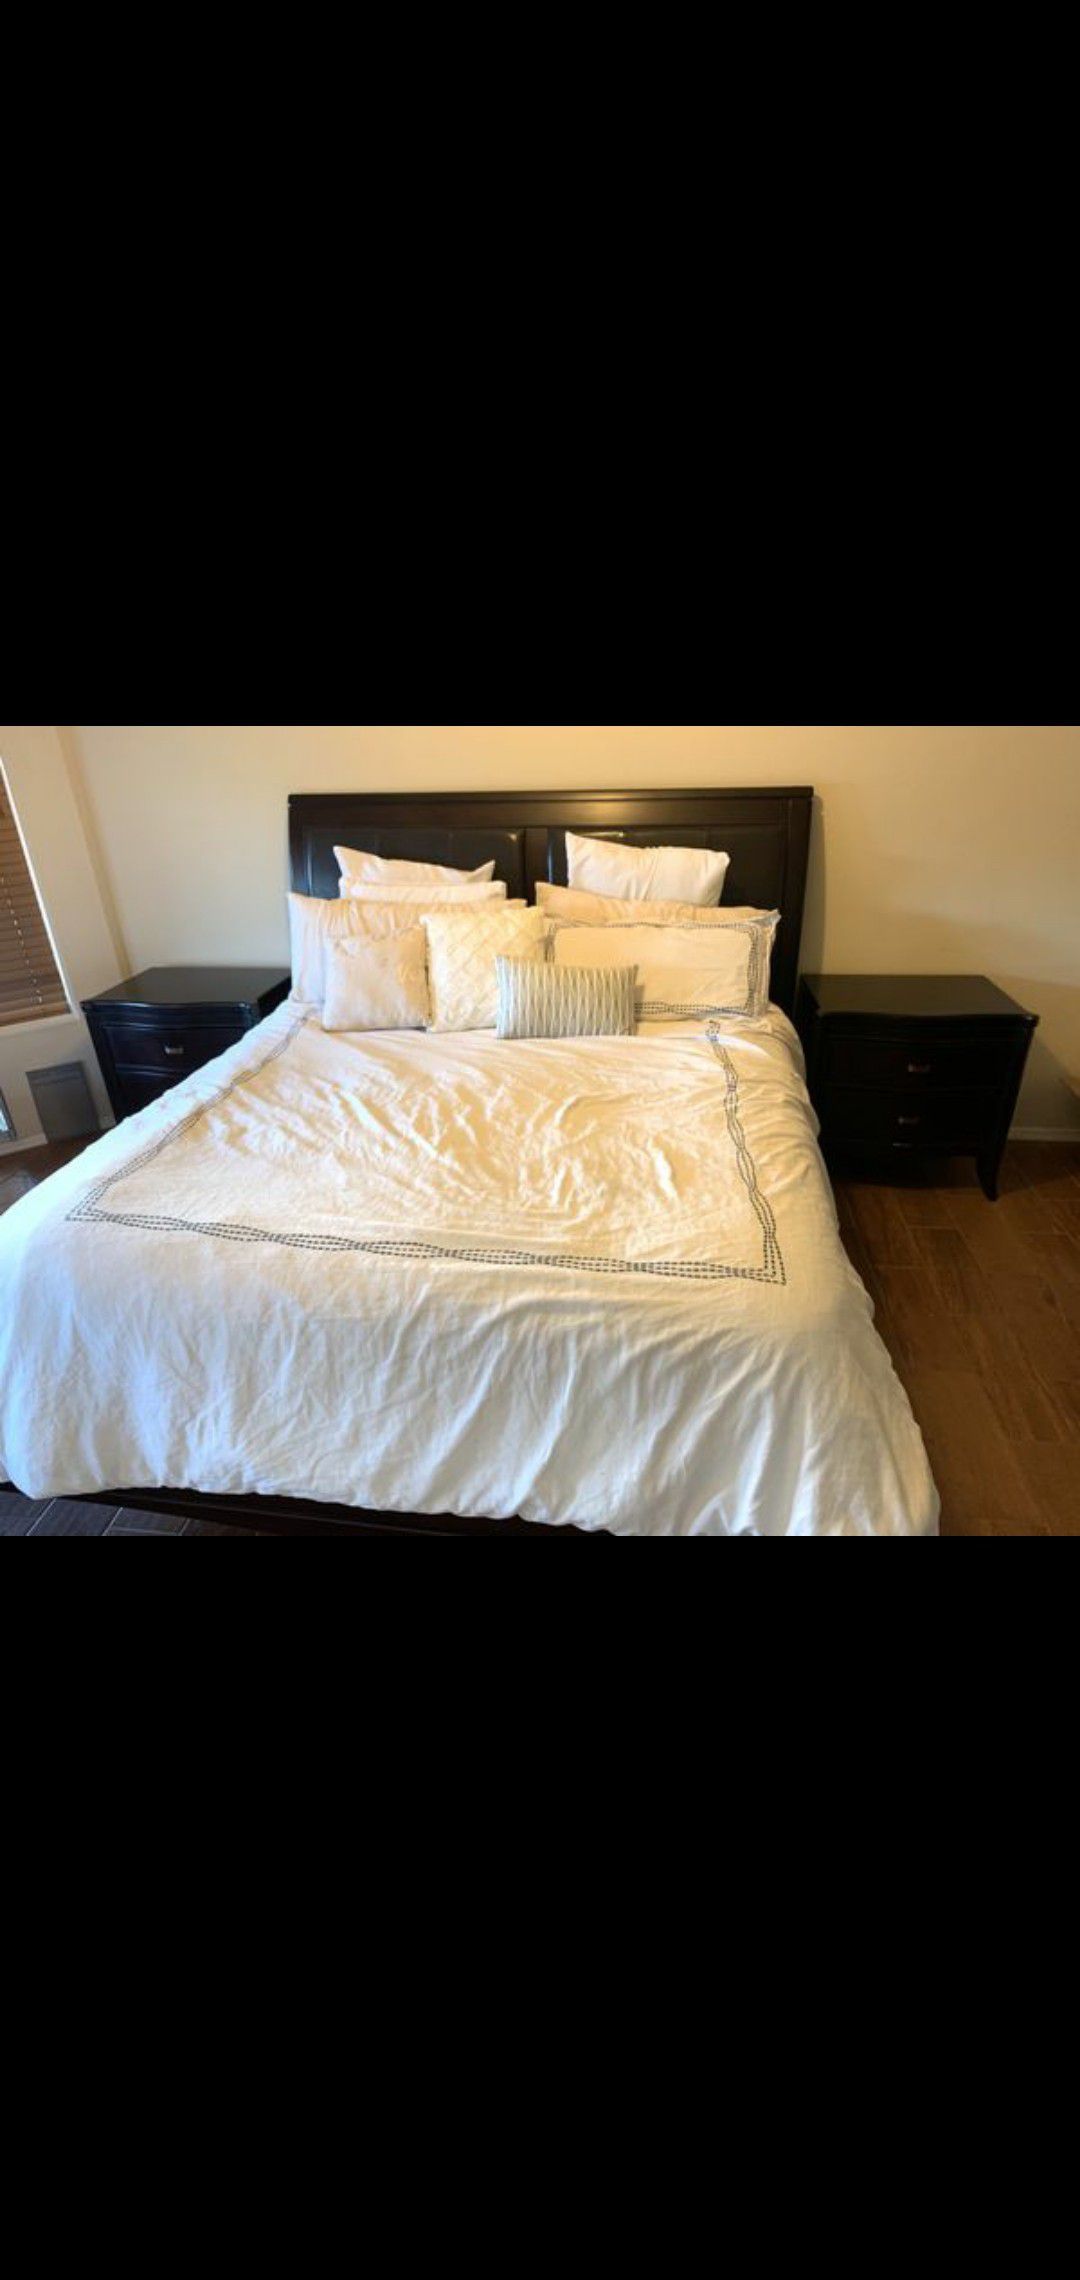 California king mattress and bed frame